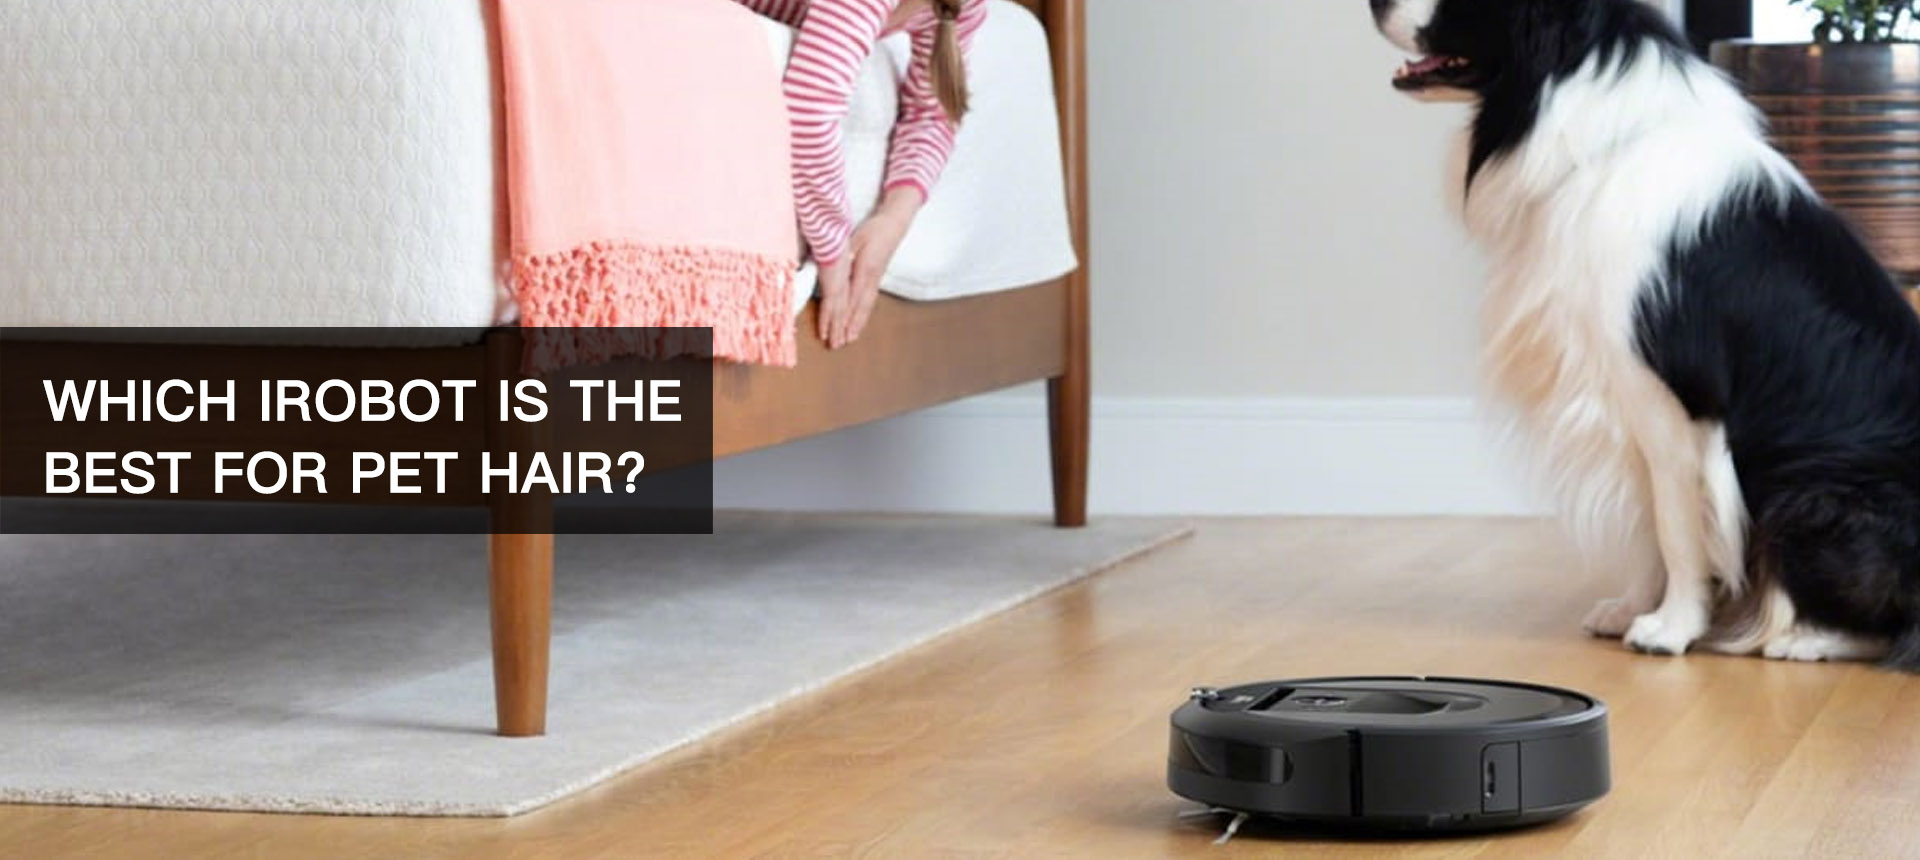 Which iRobot is the Best for Pet Hair